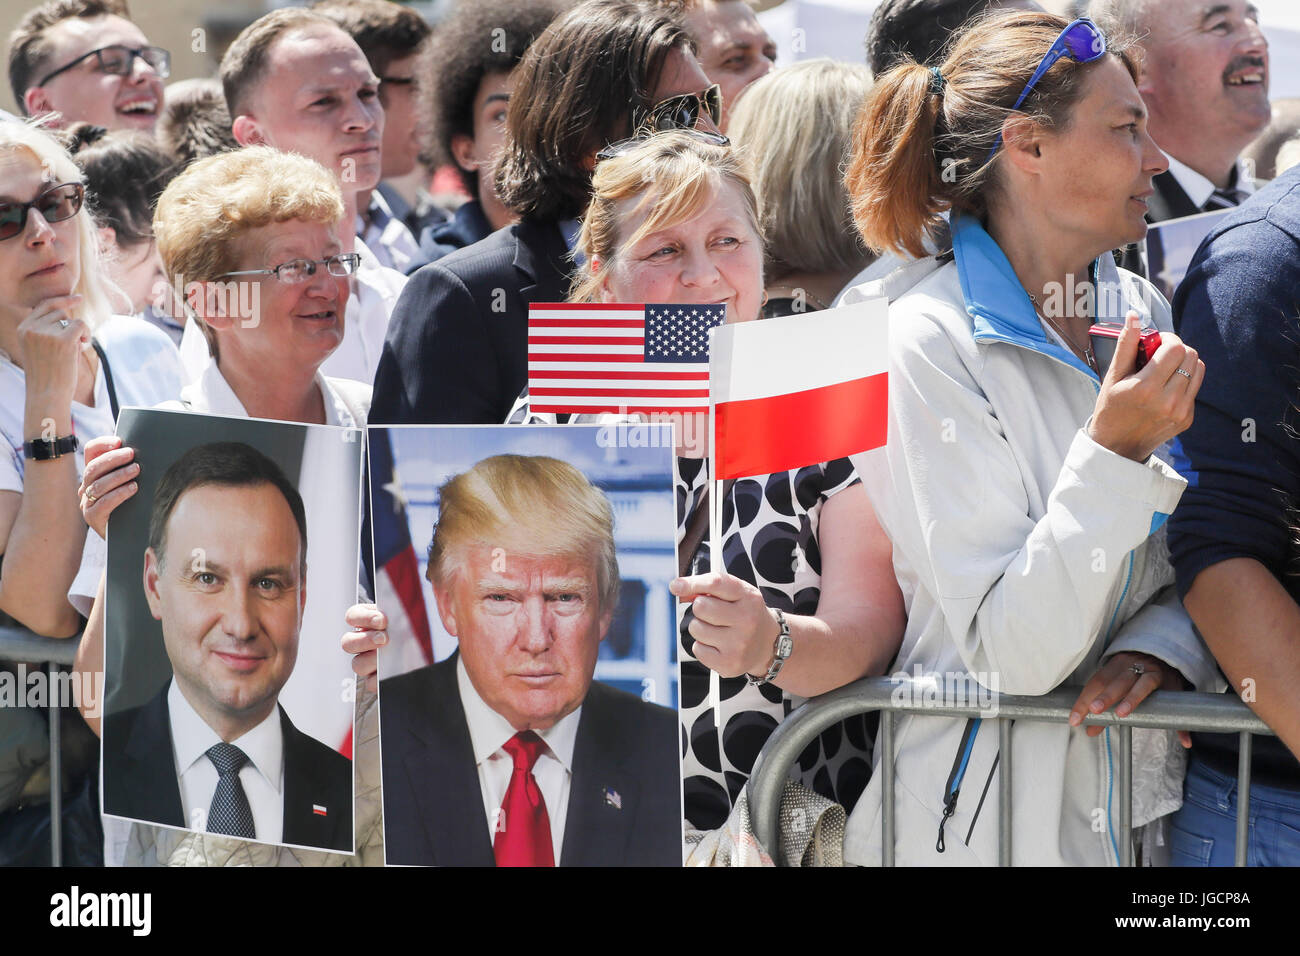 Warsaw, Poland. 06th July, 2017. US president Donald Trump delivers his speech during his state visit on July 6, 2017 at the Krasinski Square in Warsaw, Poland. Credit: East News sp. z o.o./Alamy Live News Stock Photo